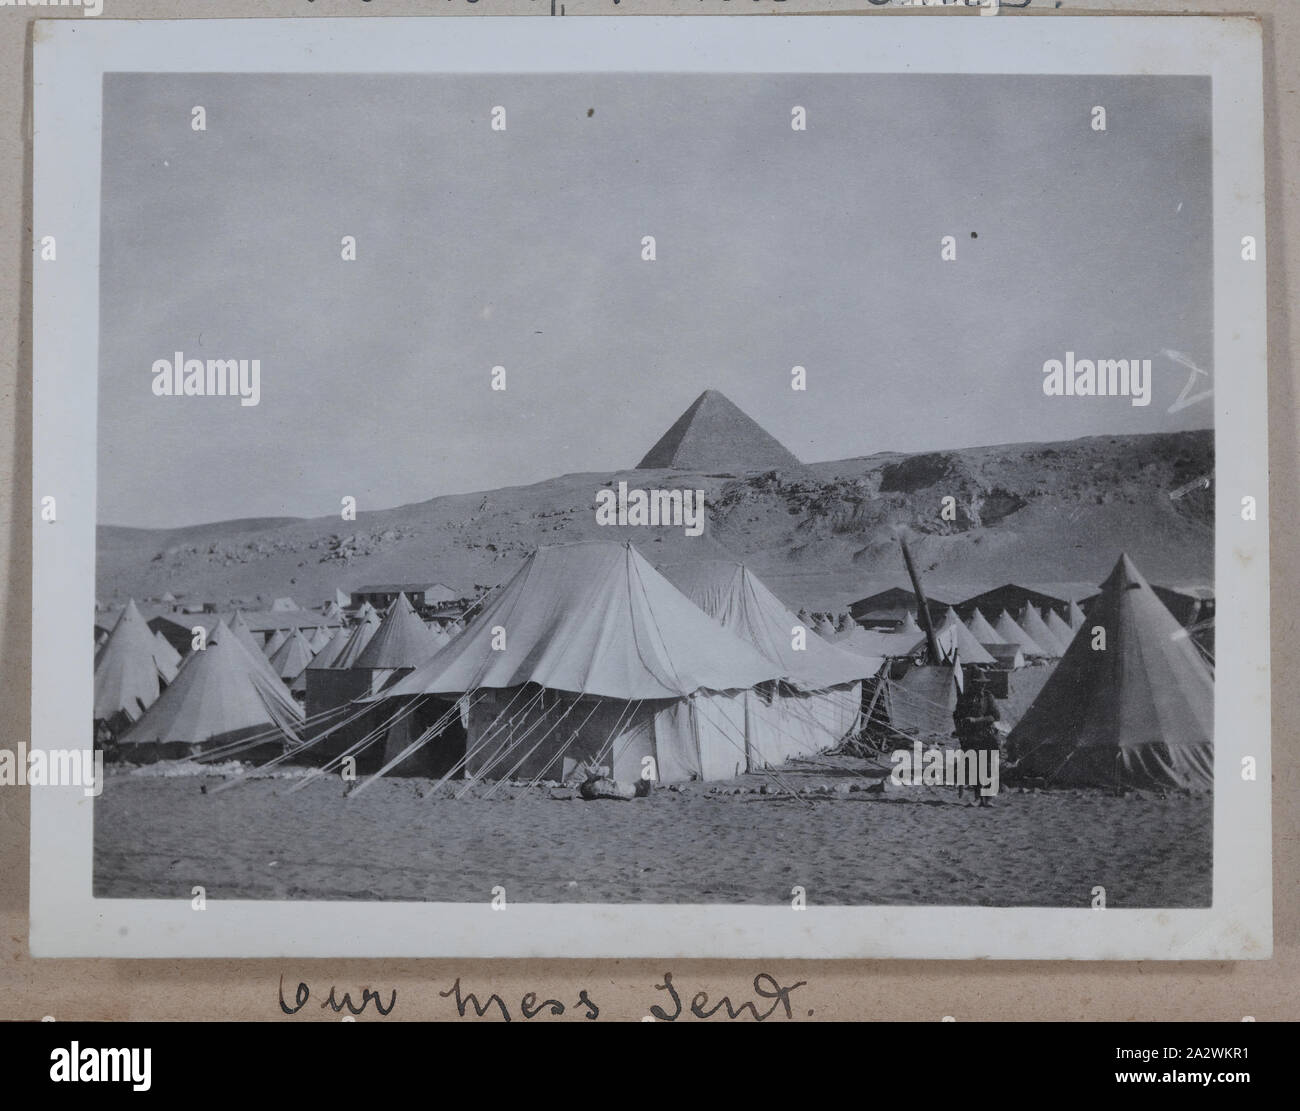 Photograph - 'Our Mess Tent', Egypt, Captain Edward Albert McKenna, World War I, 1914-1915, One of 139 photographs in an album from World War I likely to have been taken by Captain Edward Albert McKenna. The photographs include the 7th Battalion training in Mena Camp, Egypt, and sight-seeing. Image depicting the Mess Tent at Mena Camp. Mena Camp was one of three training camps used by the A.I.F. and the N.Z.E.F Stock Photo